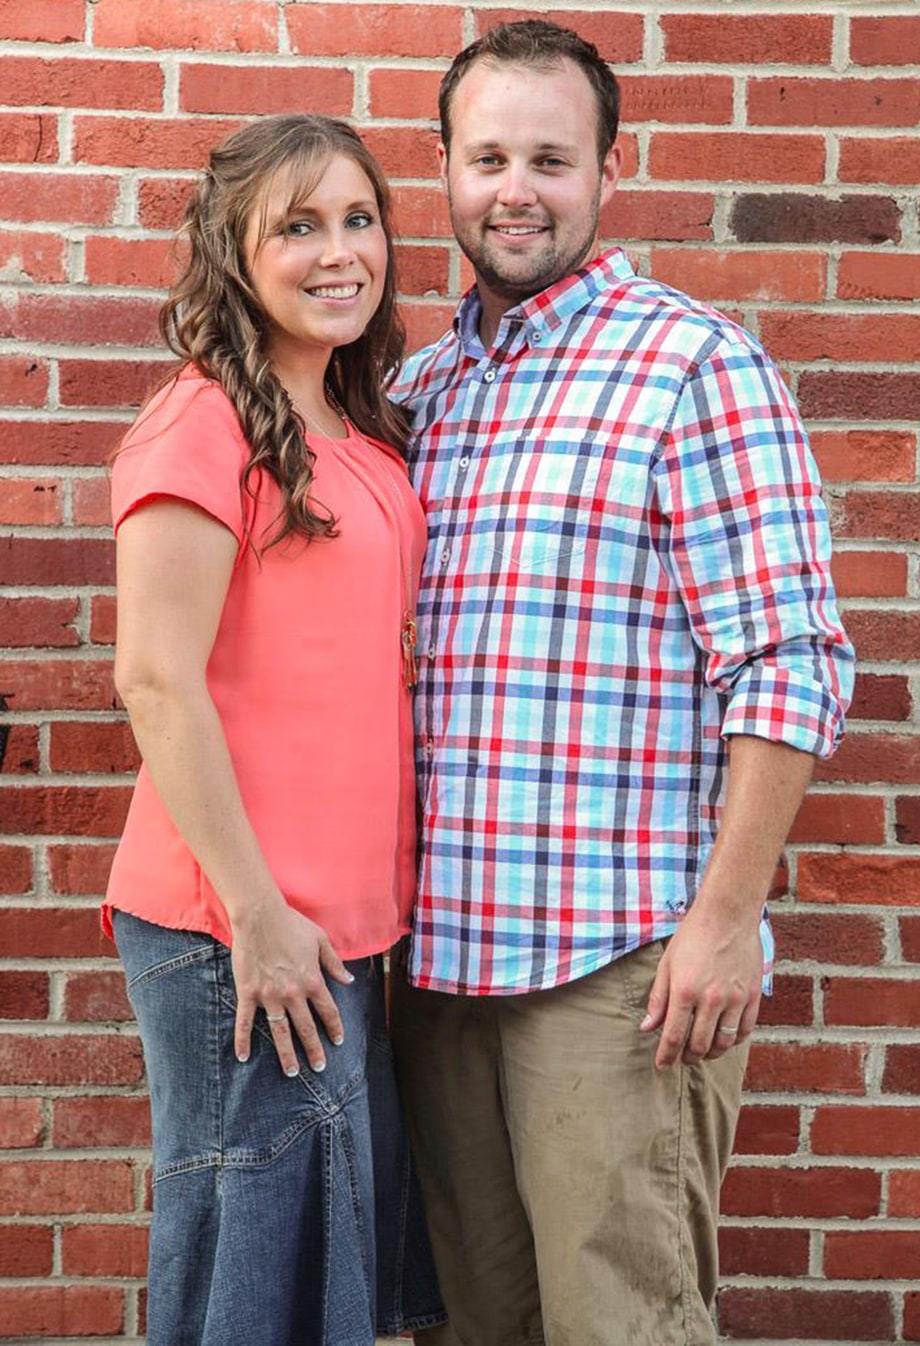 It looks like the Duggar clan is about to get larger with Anna Duggar rumored to be pregnant.